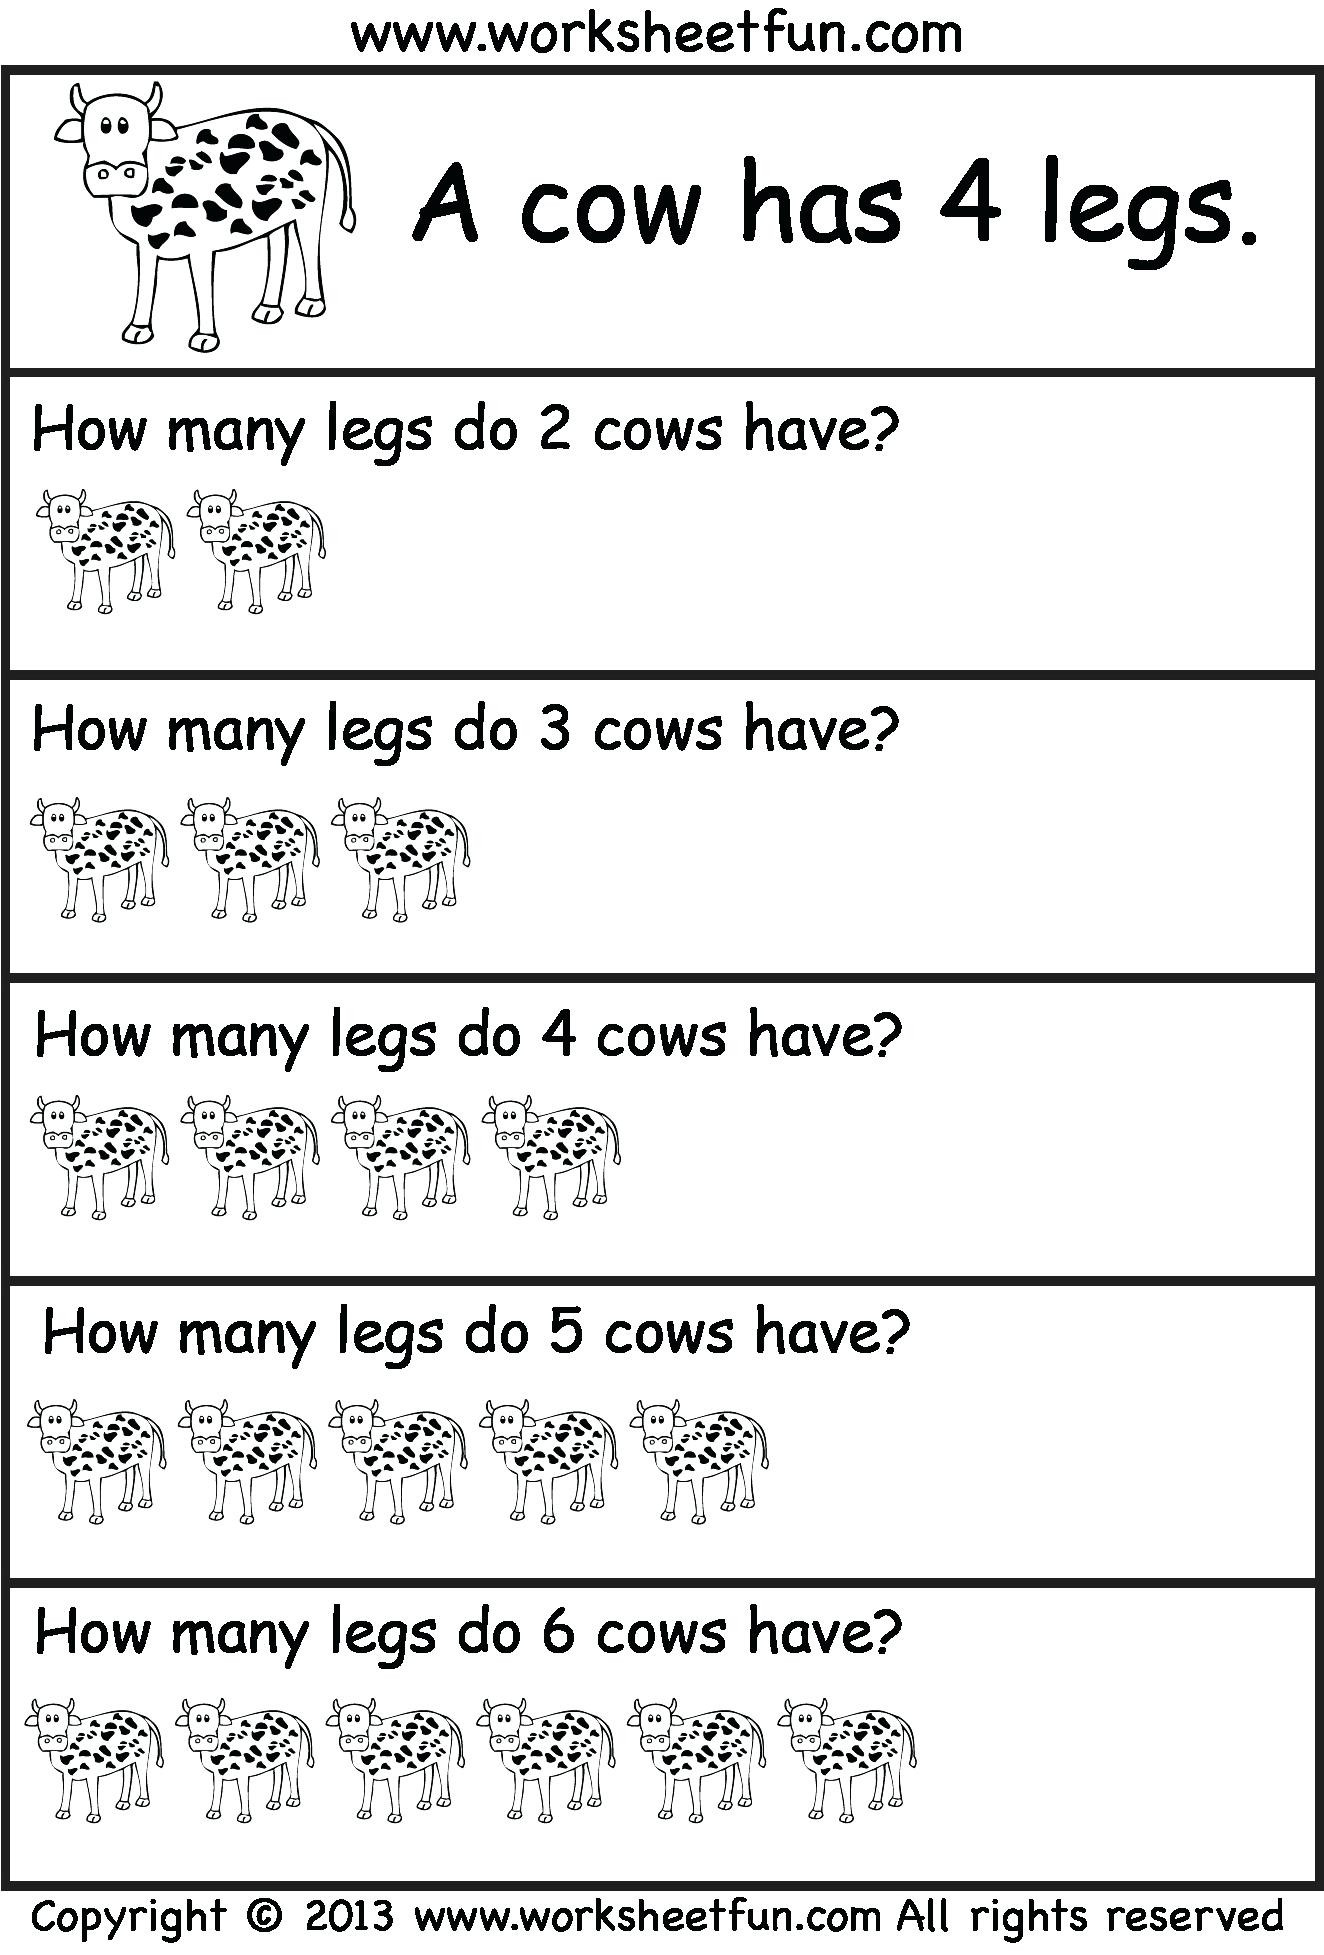 Free Math Worksheets Third Grade 3 Fractions and Decimals Mixed Numbers to Decimals